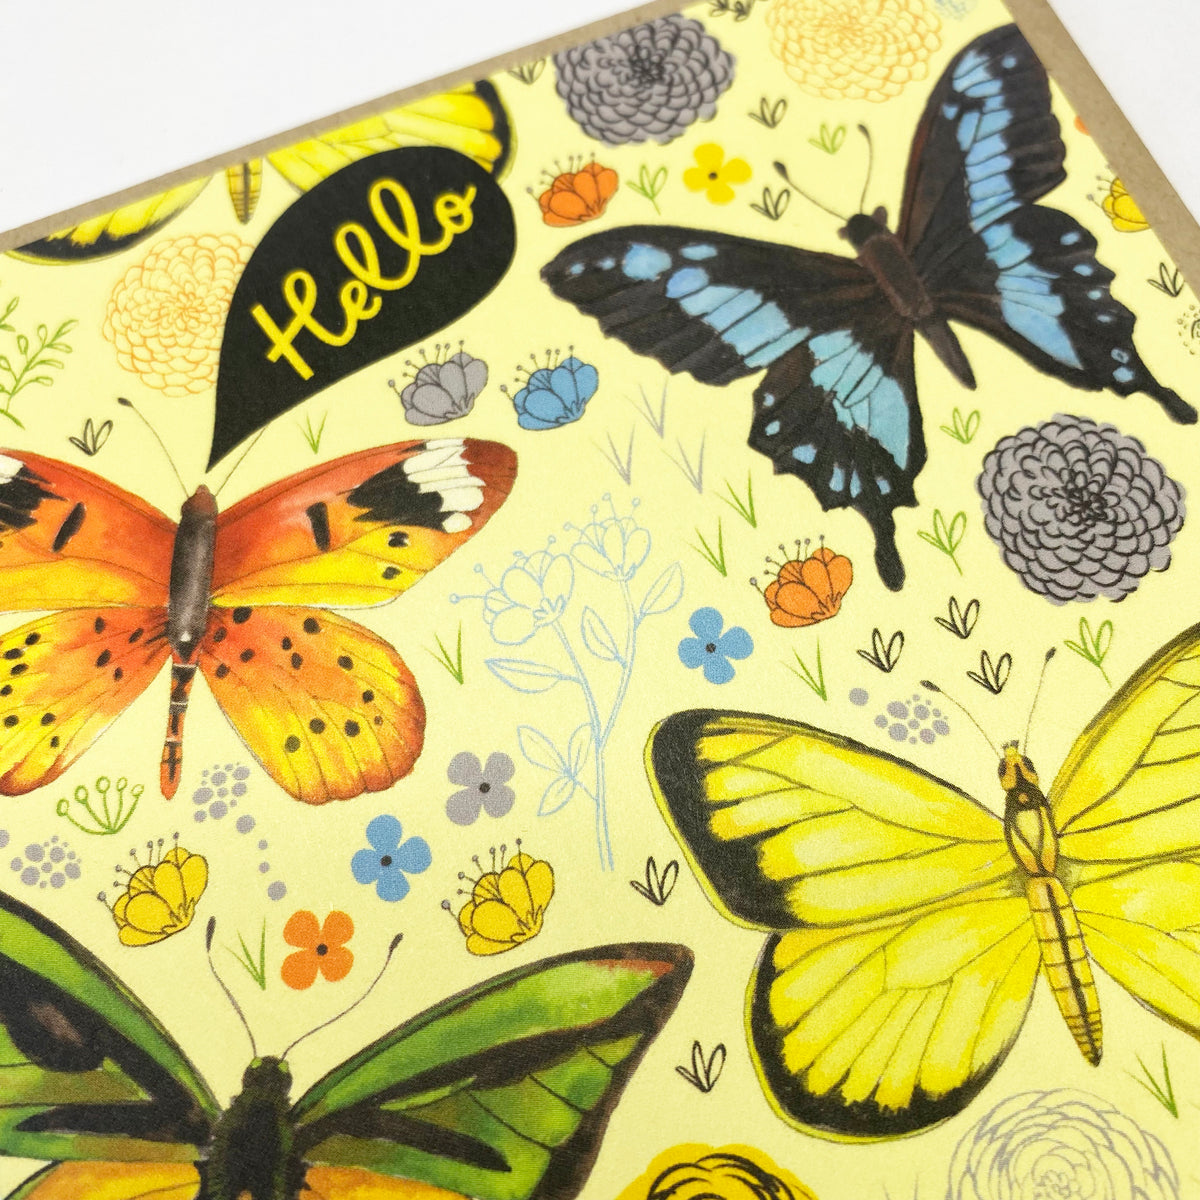 Boxed Set of 8 Cards-Hello Butterflies Greeting Cards